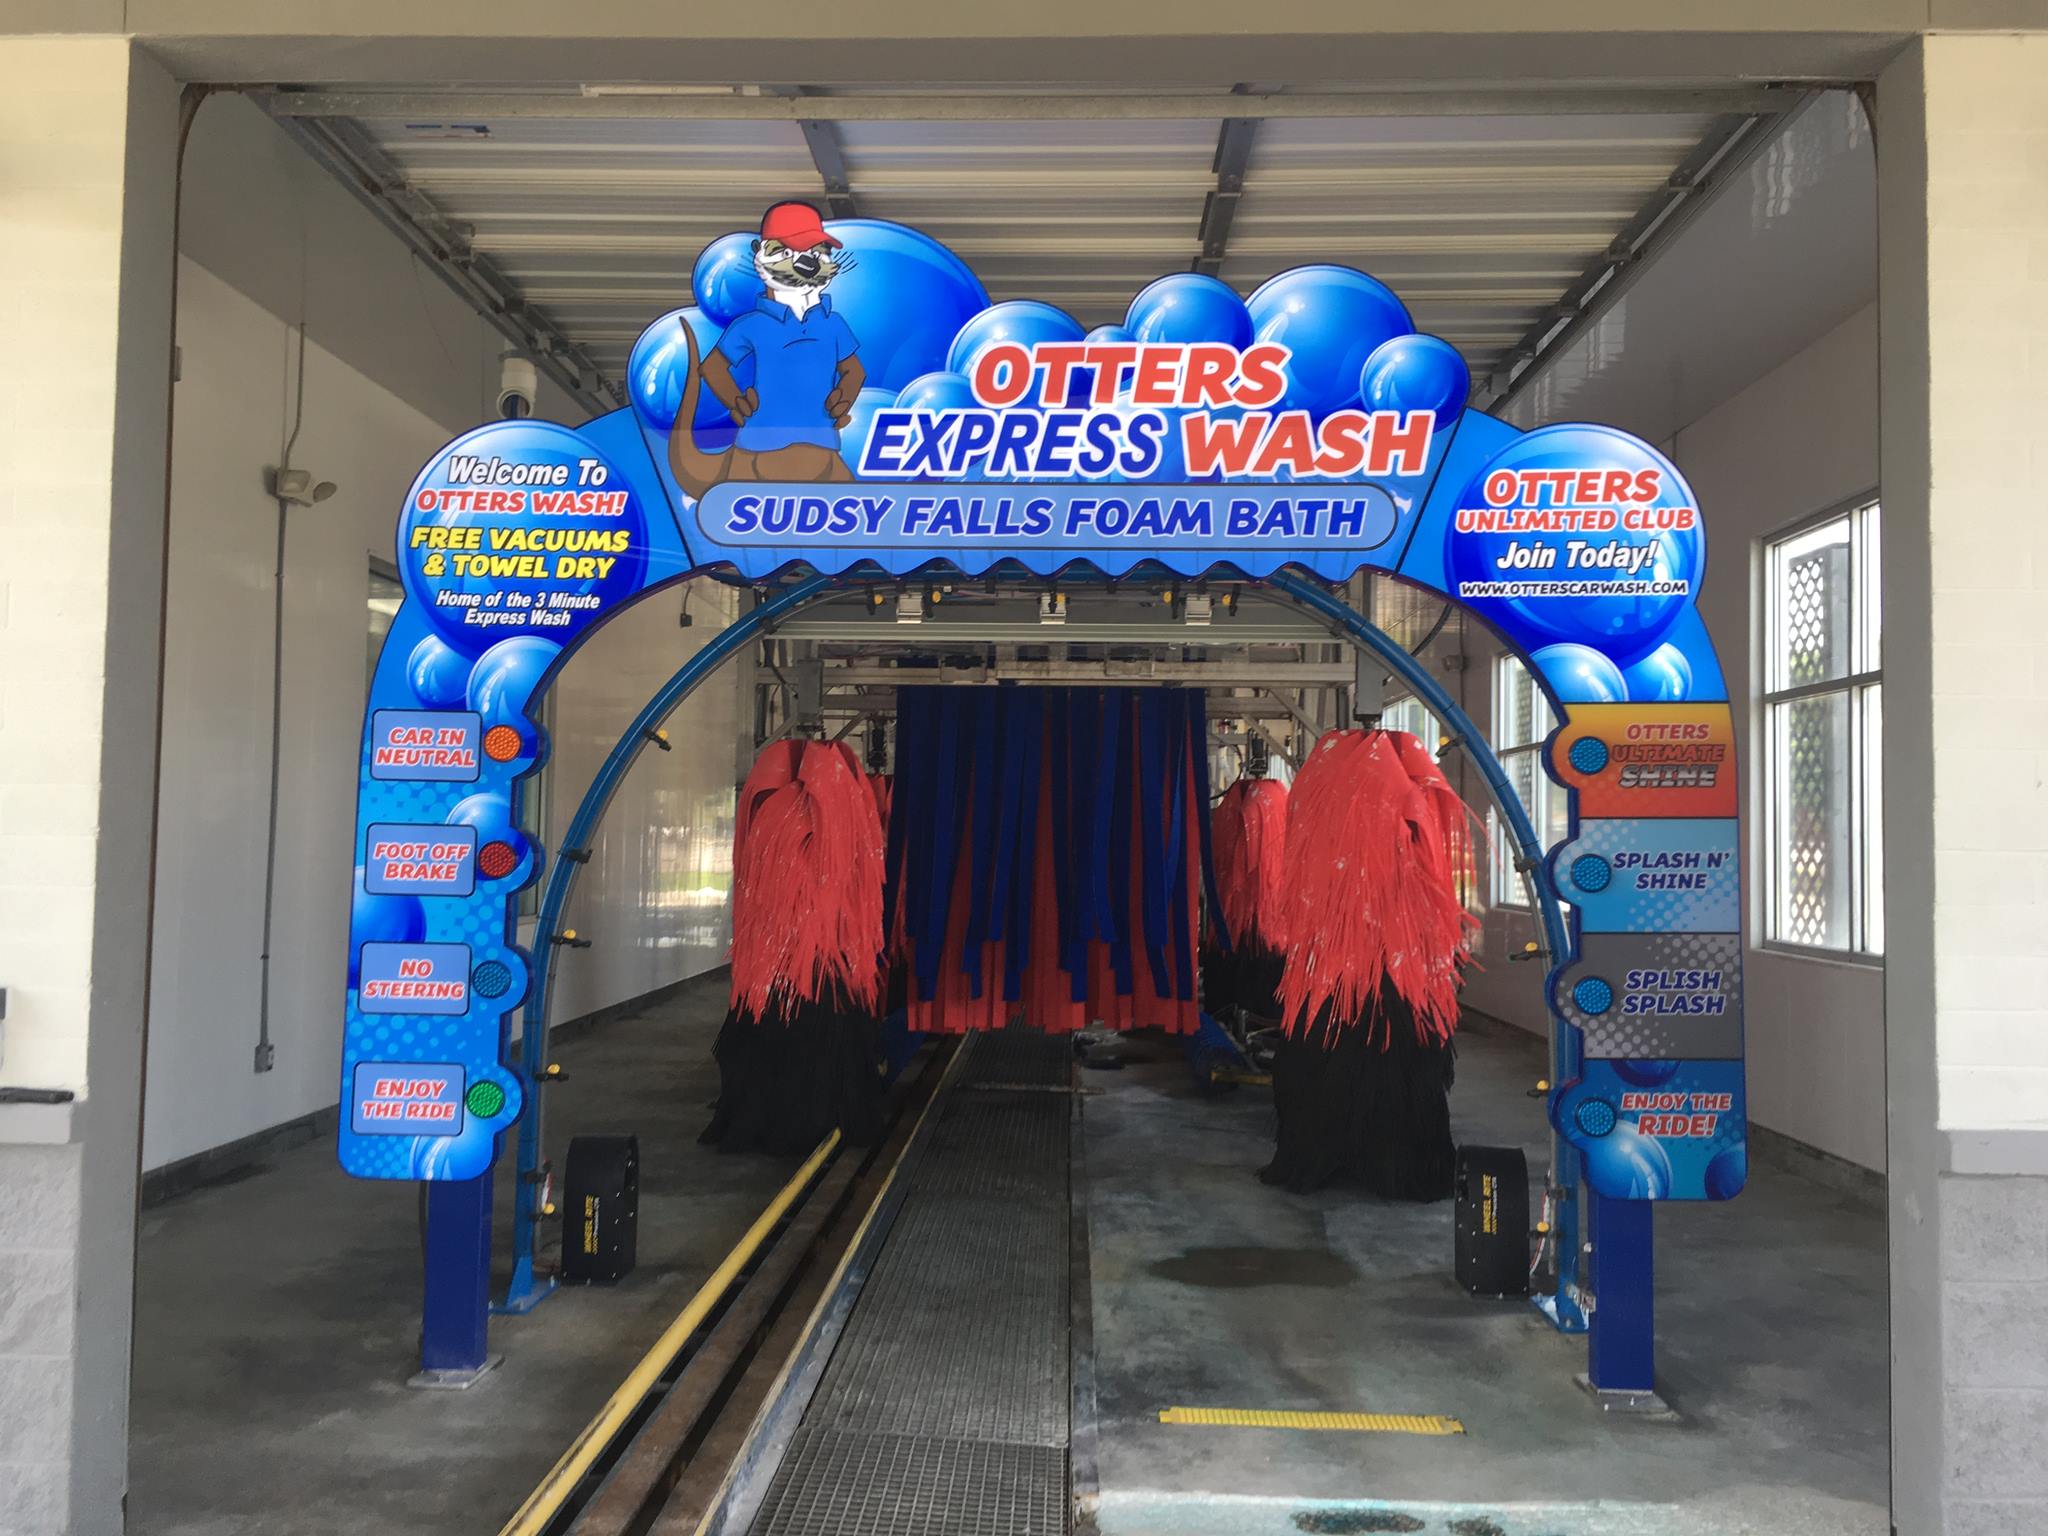 Promotional Signs - TSS Car Wash Equipment